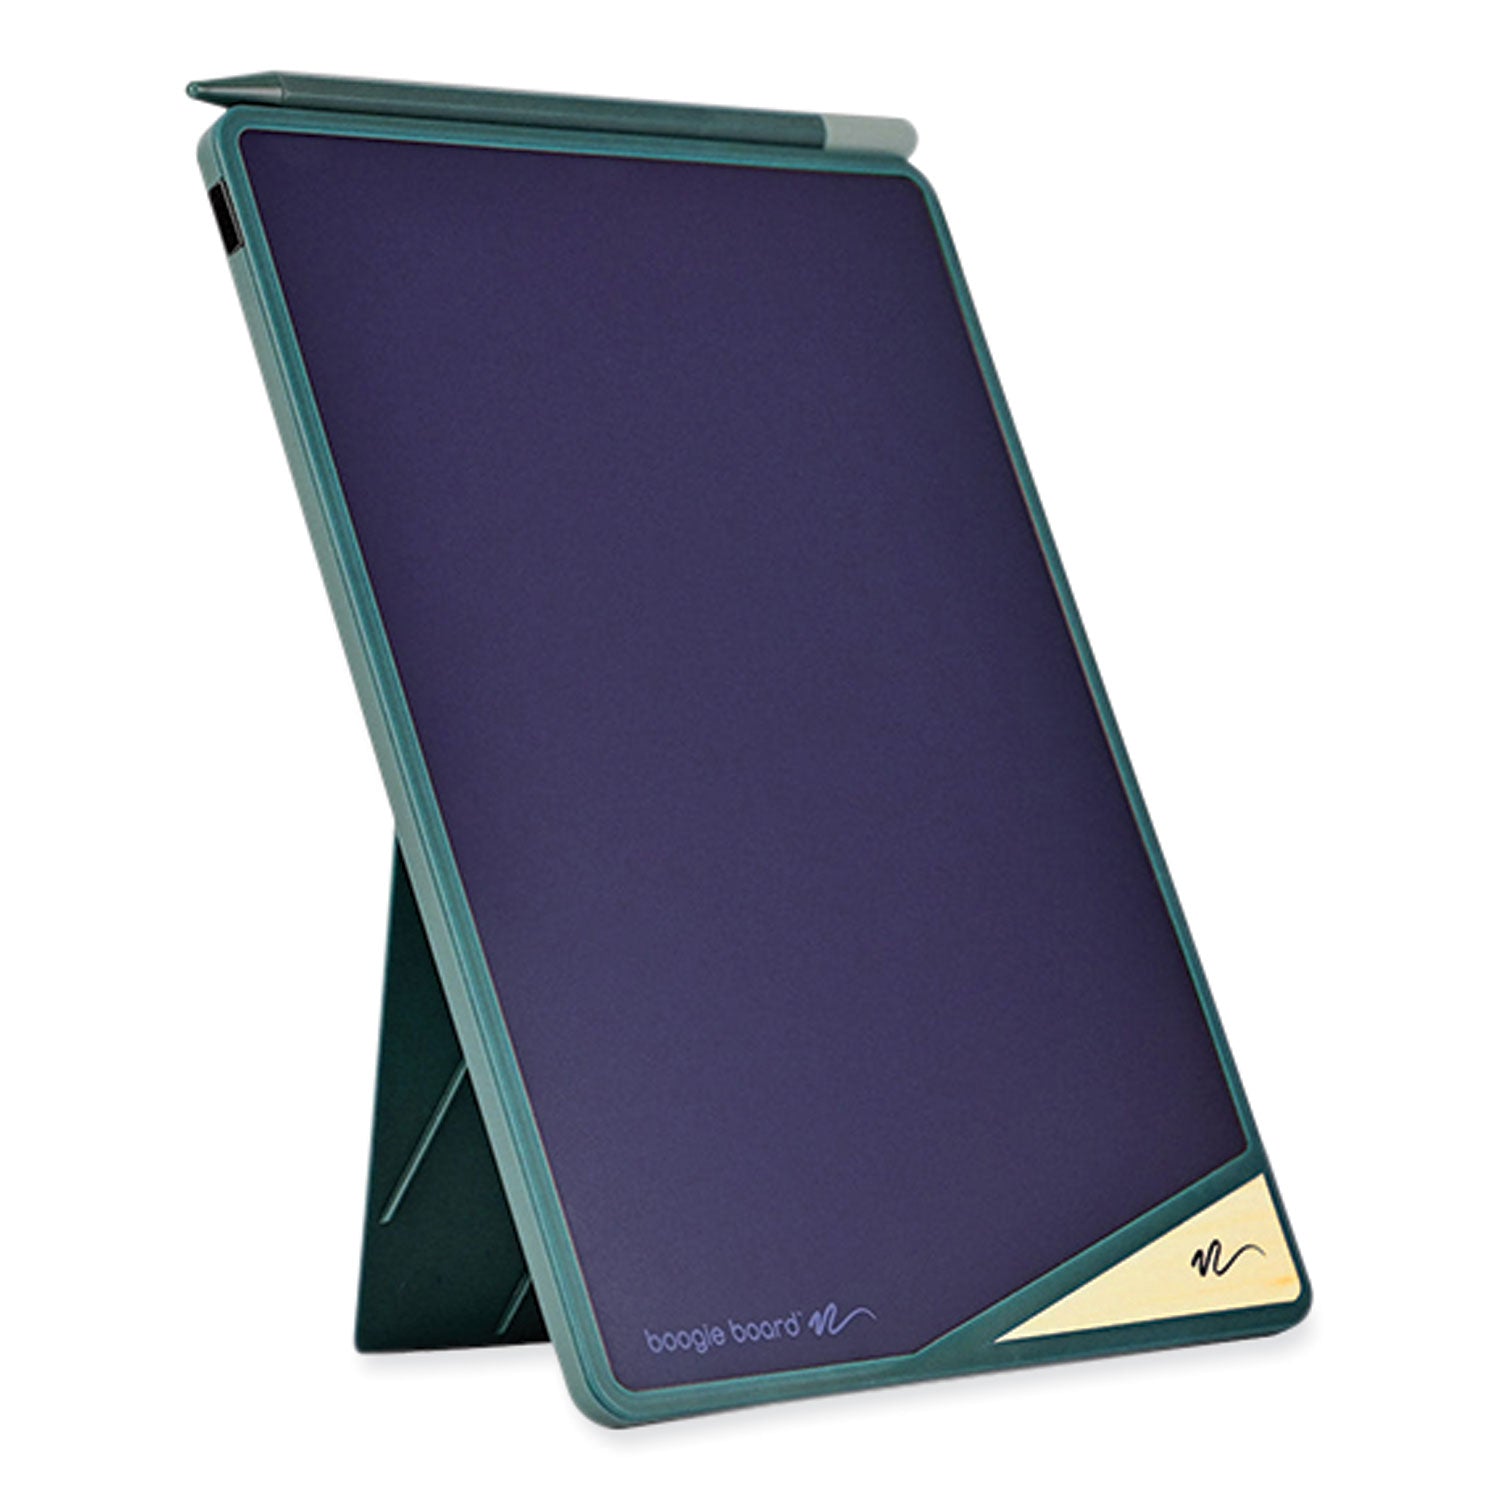 versaboard-reusable-writing-tablet-85-lcd-touchscreen-55-x-725-mineral-green-black_imv0560001 - 1